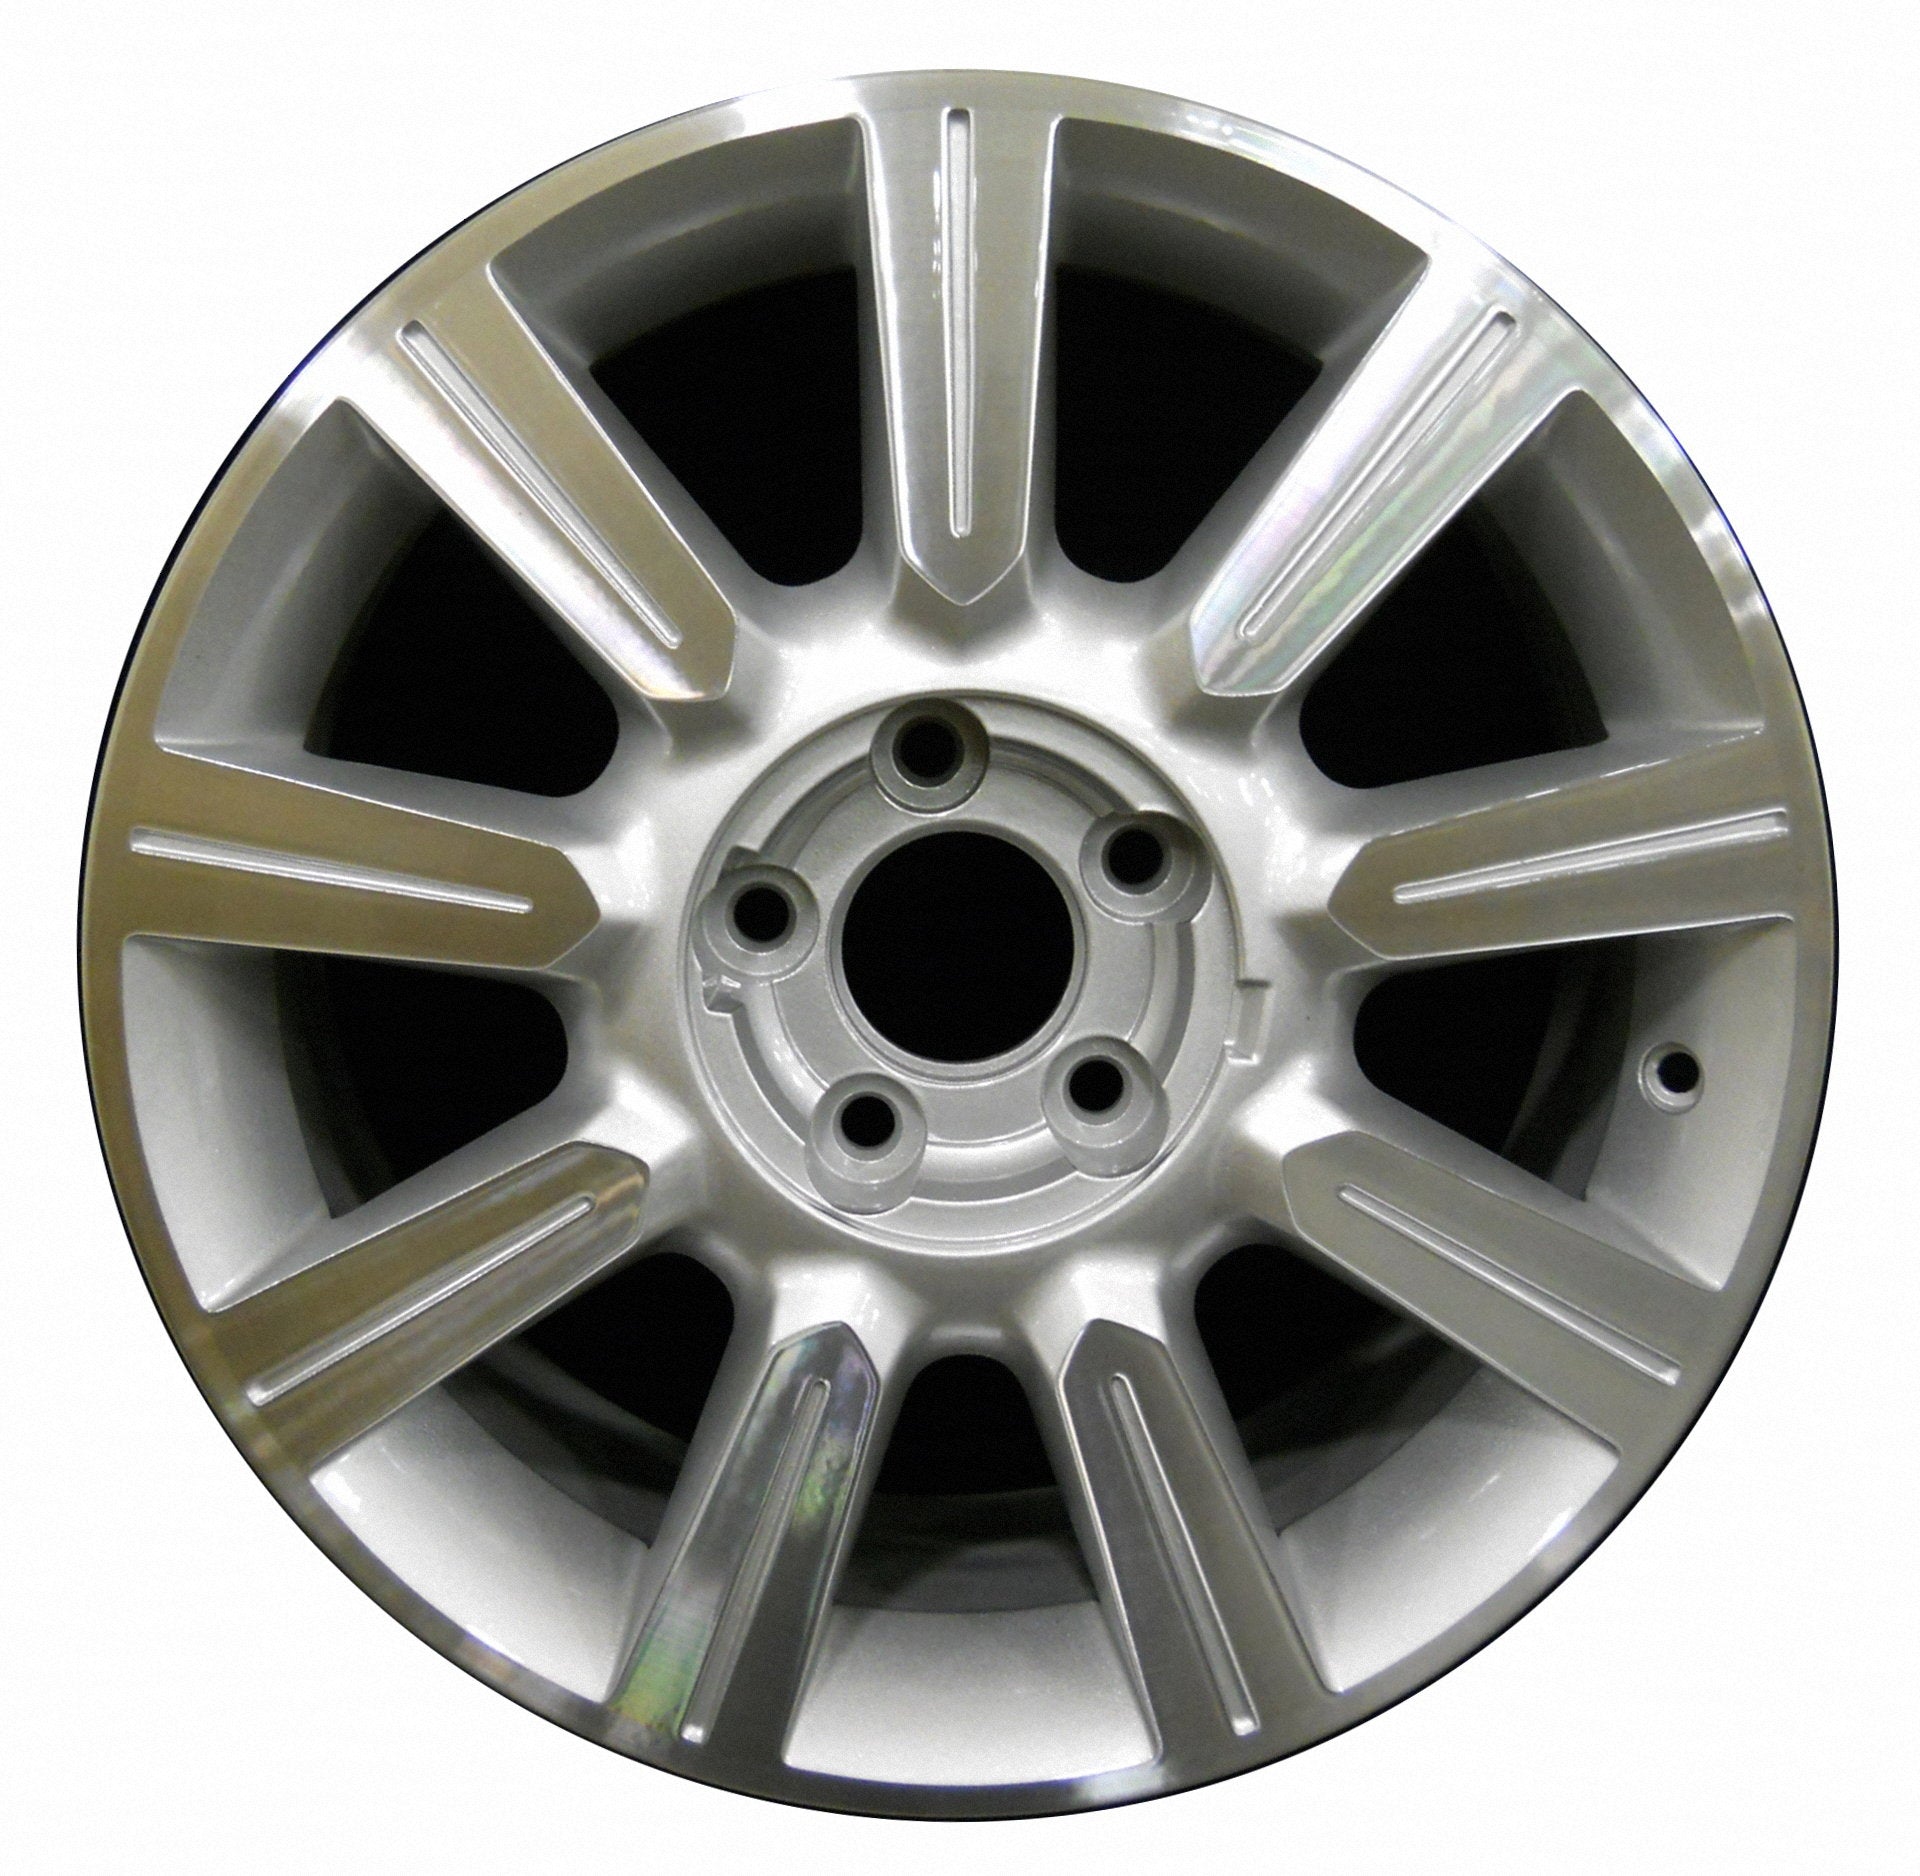 Lincoln MKZ  2010, 2011, 2012 Factory OEM Car Wheel Size 17x7.5 Alloy WAO.3805.PS09.MA